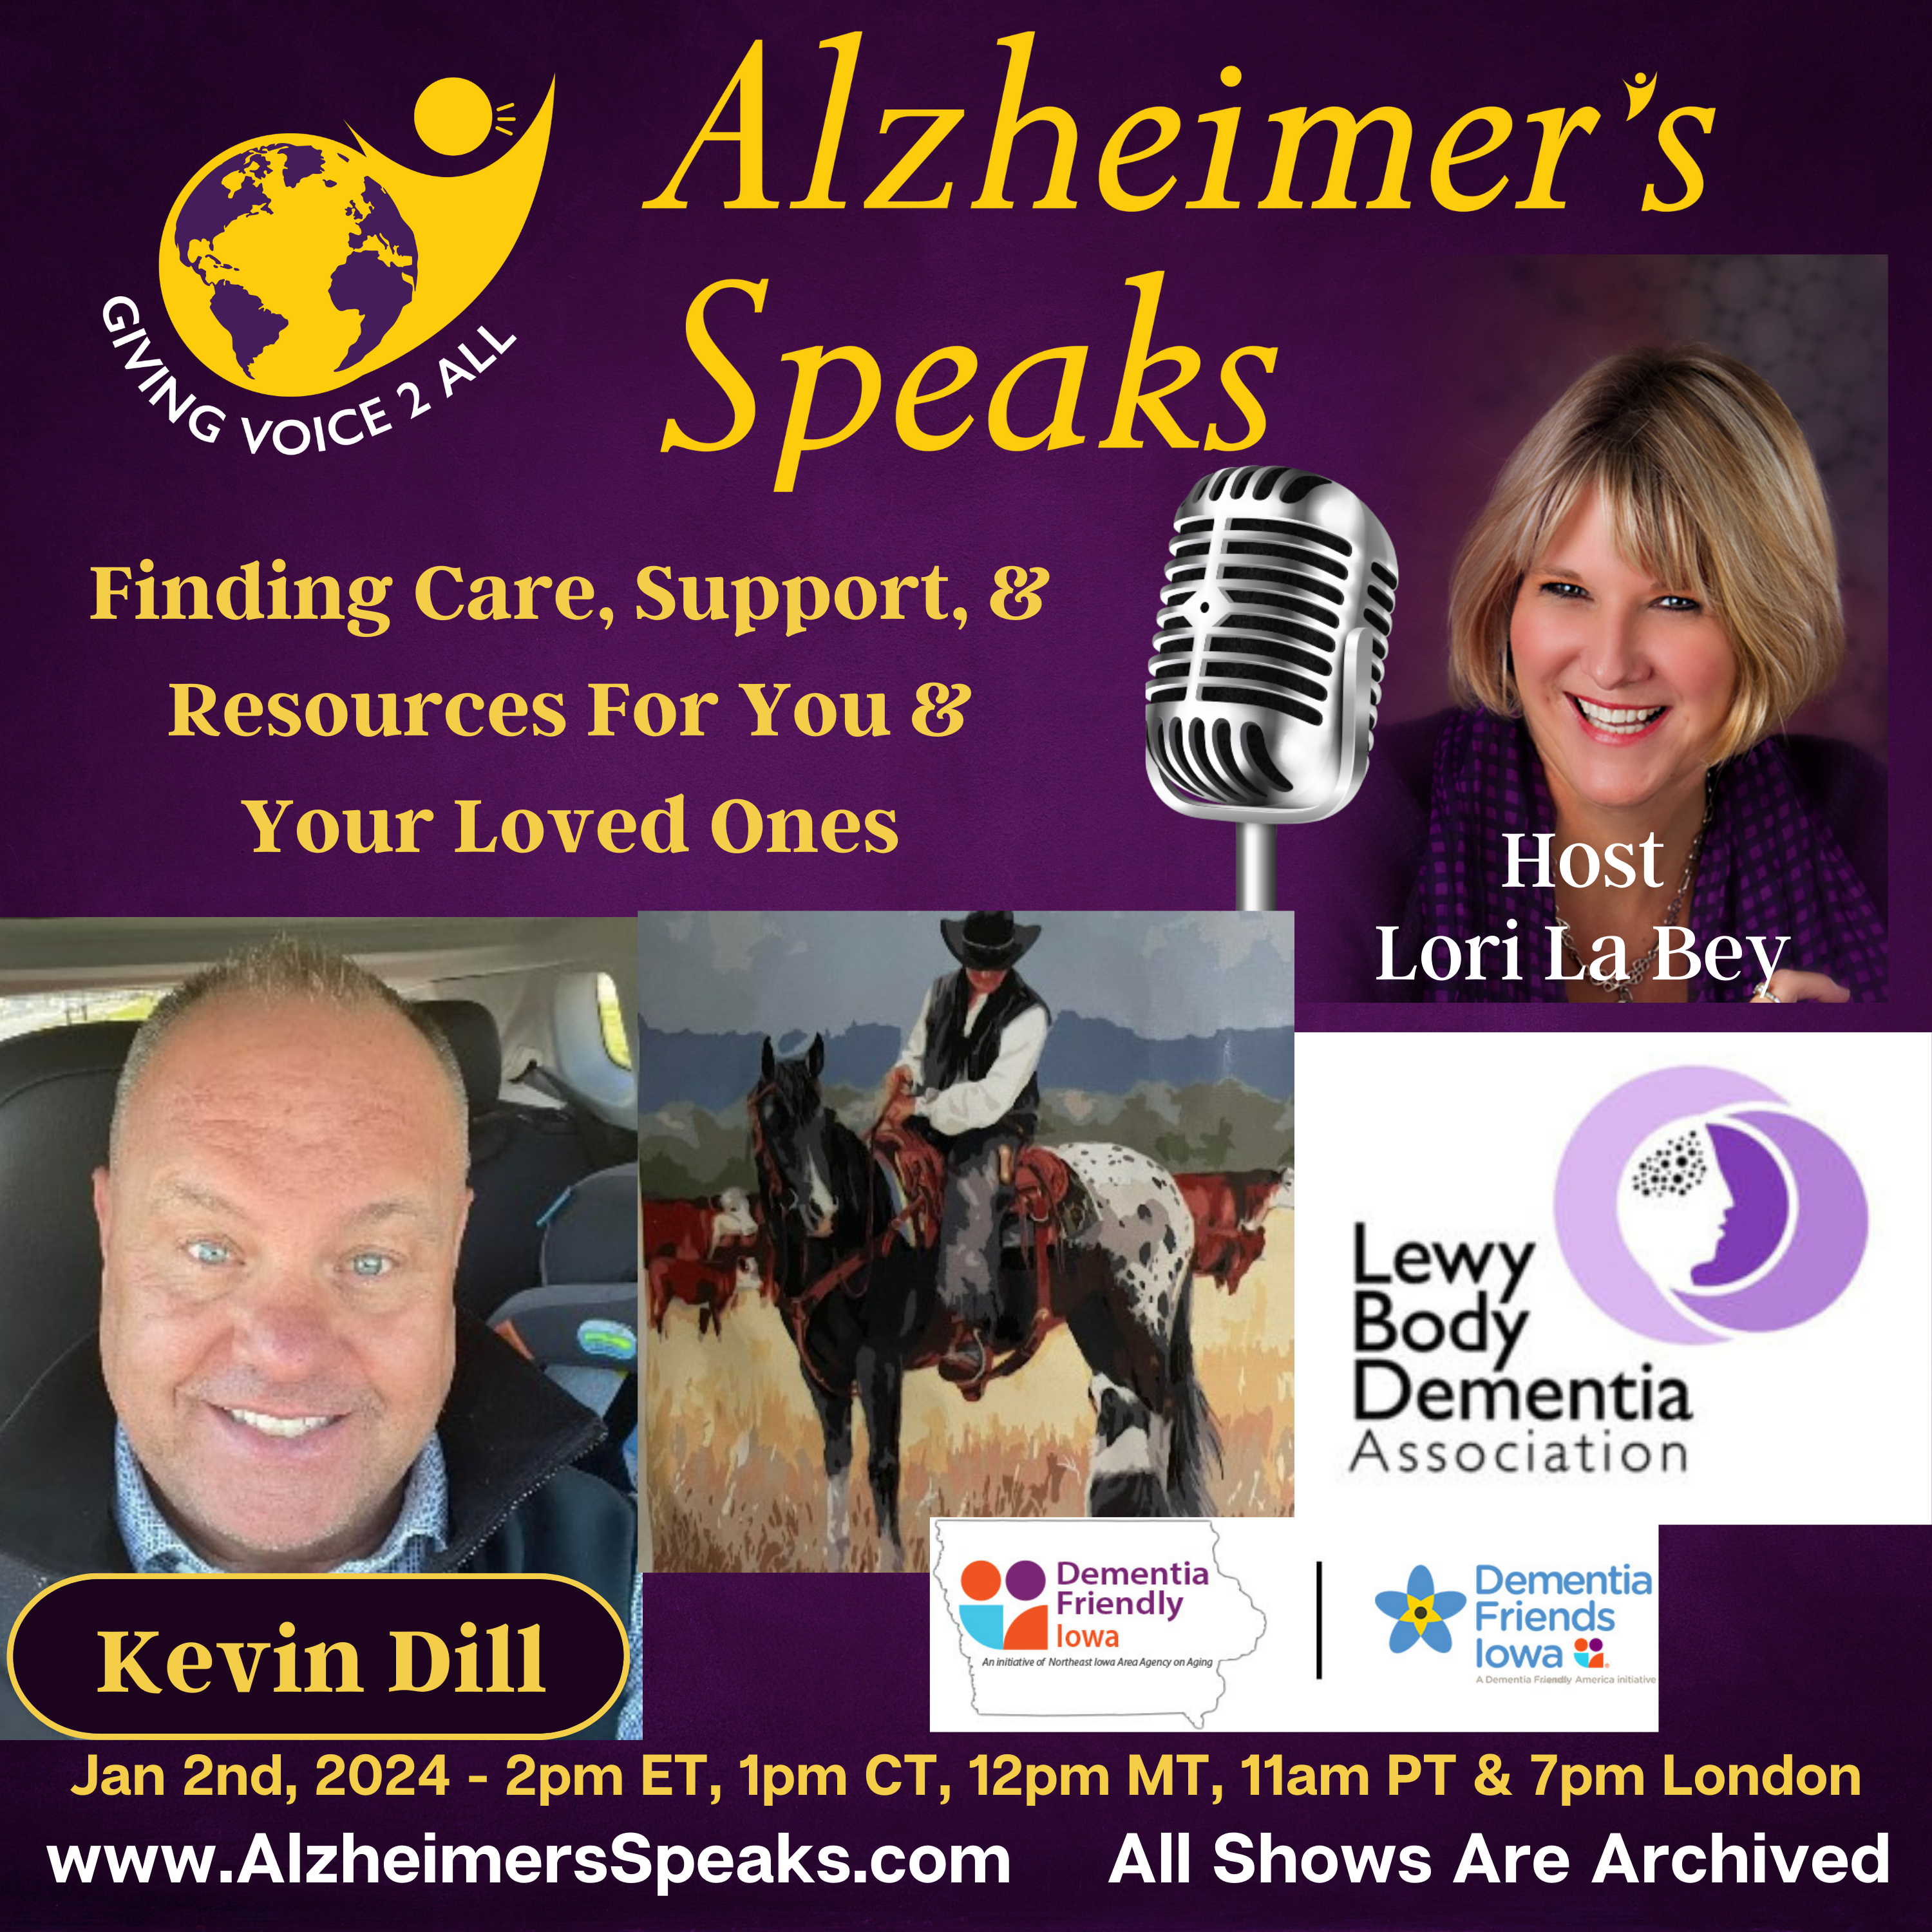 Living with Lewy Body Dementia - Kevin Dill Talks about Living with Purpose & Artwork